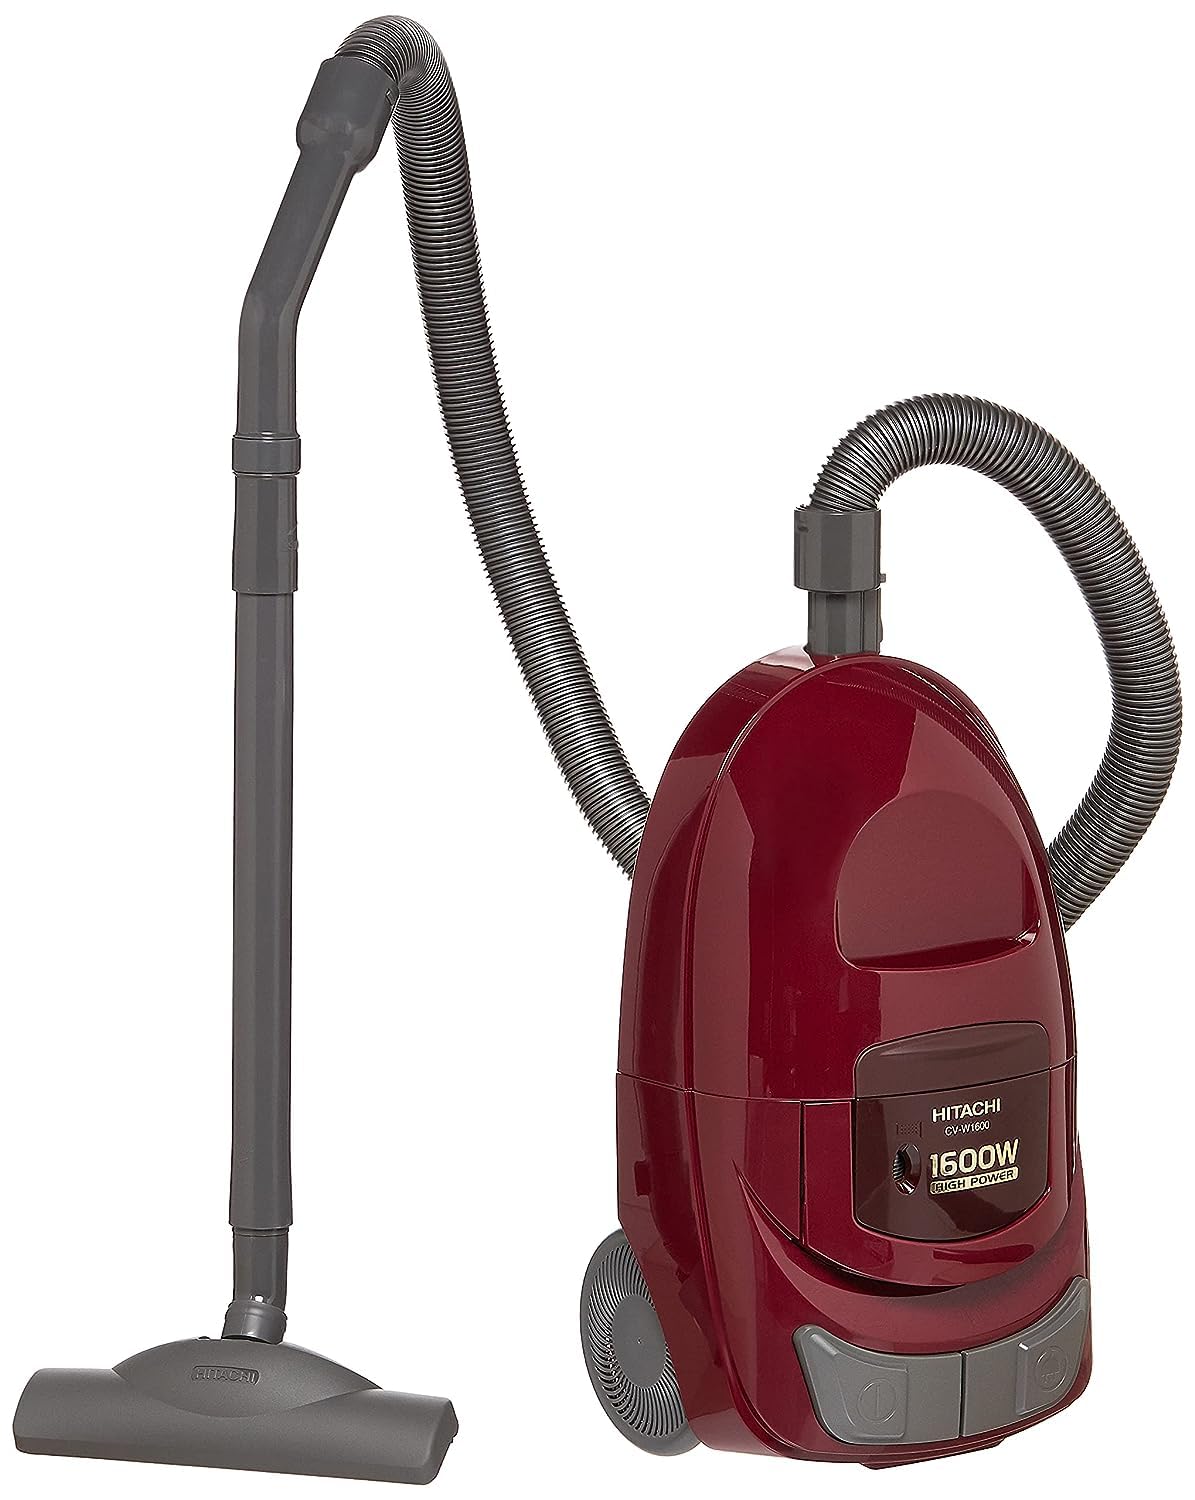 Hitachi 1600W Powerful Bagless Vacuum Cleaner, High Suction Power With 5L Big Dust Capacity, Cloth Filter, Blower Function, Rug, Floor & Crevice Nozzle, Brush, CVW160024CBSWR